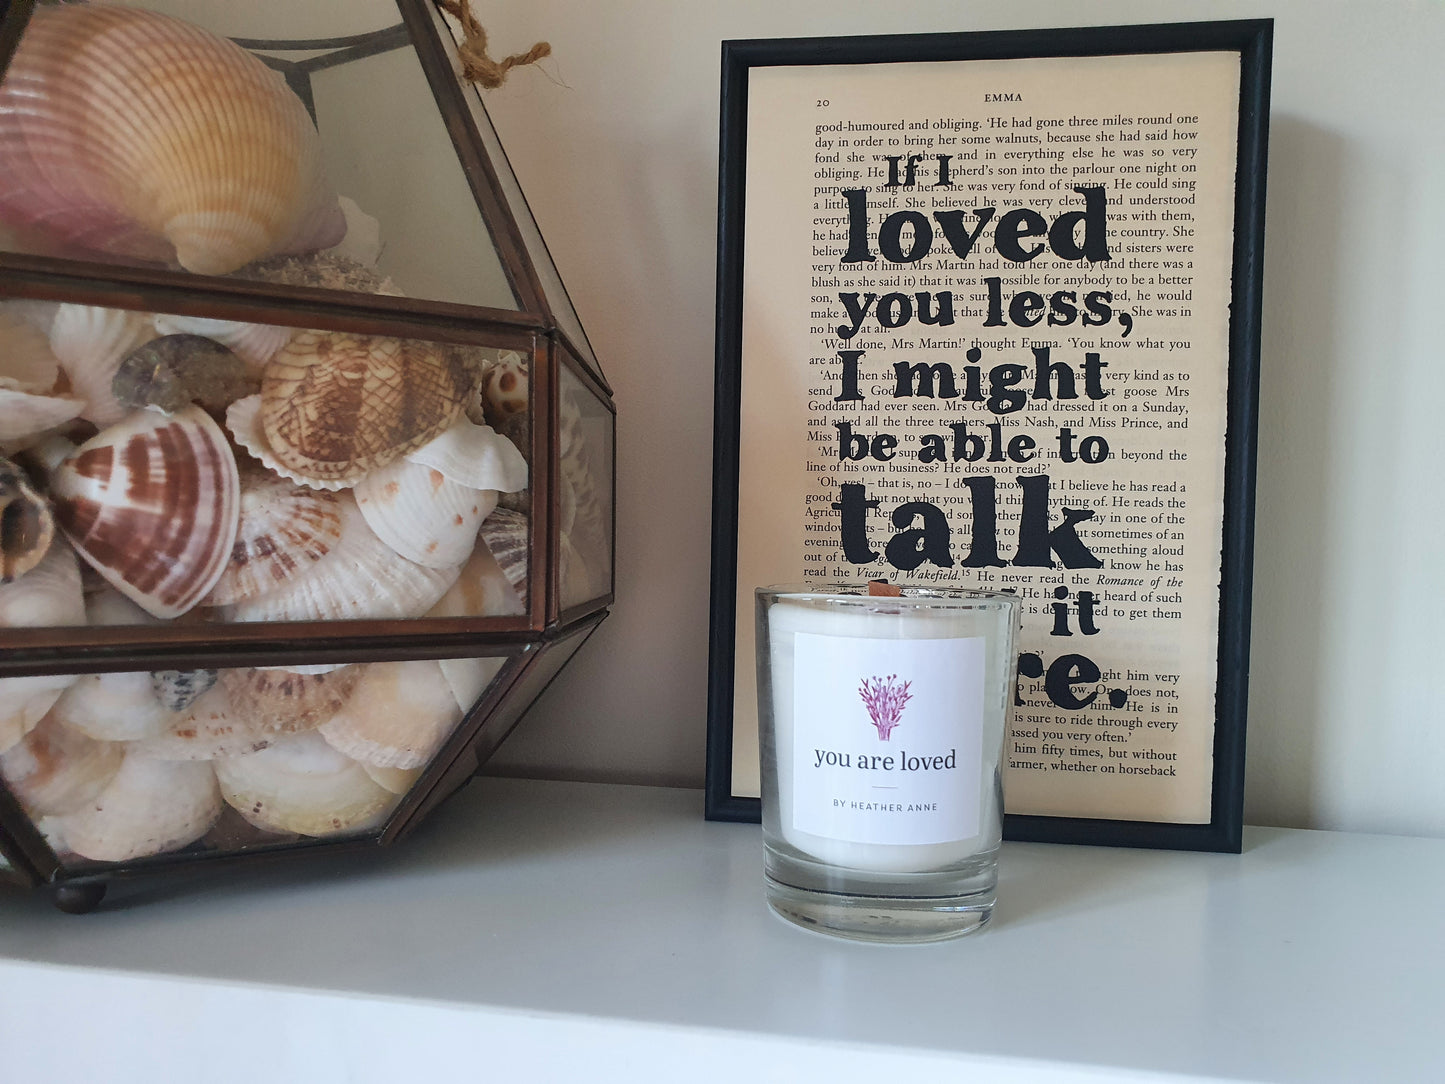 You Are Loved Woodwick Candle